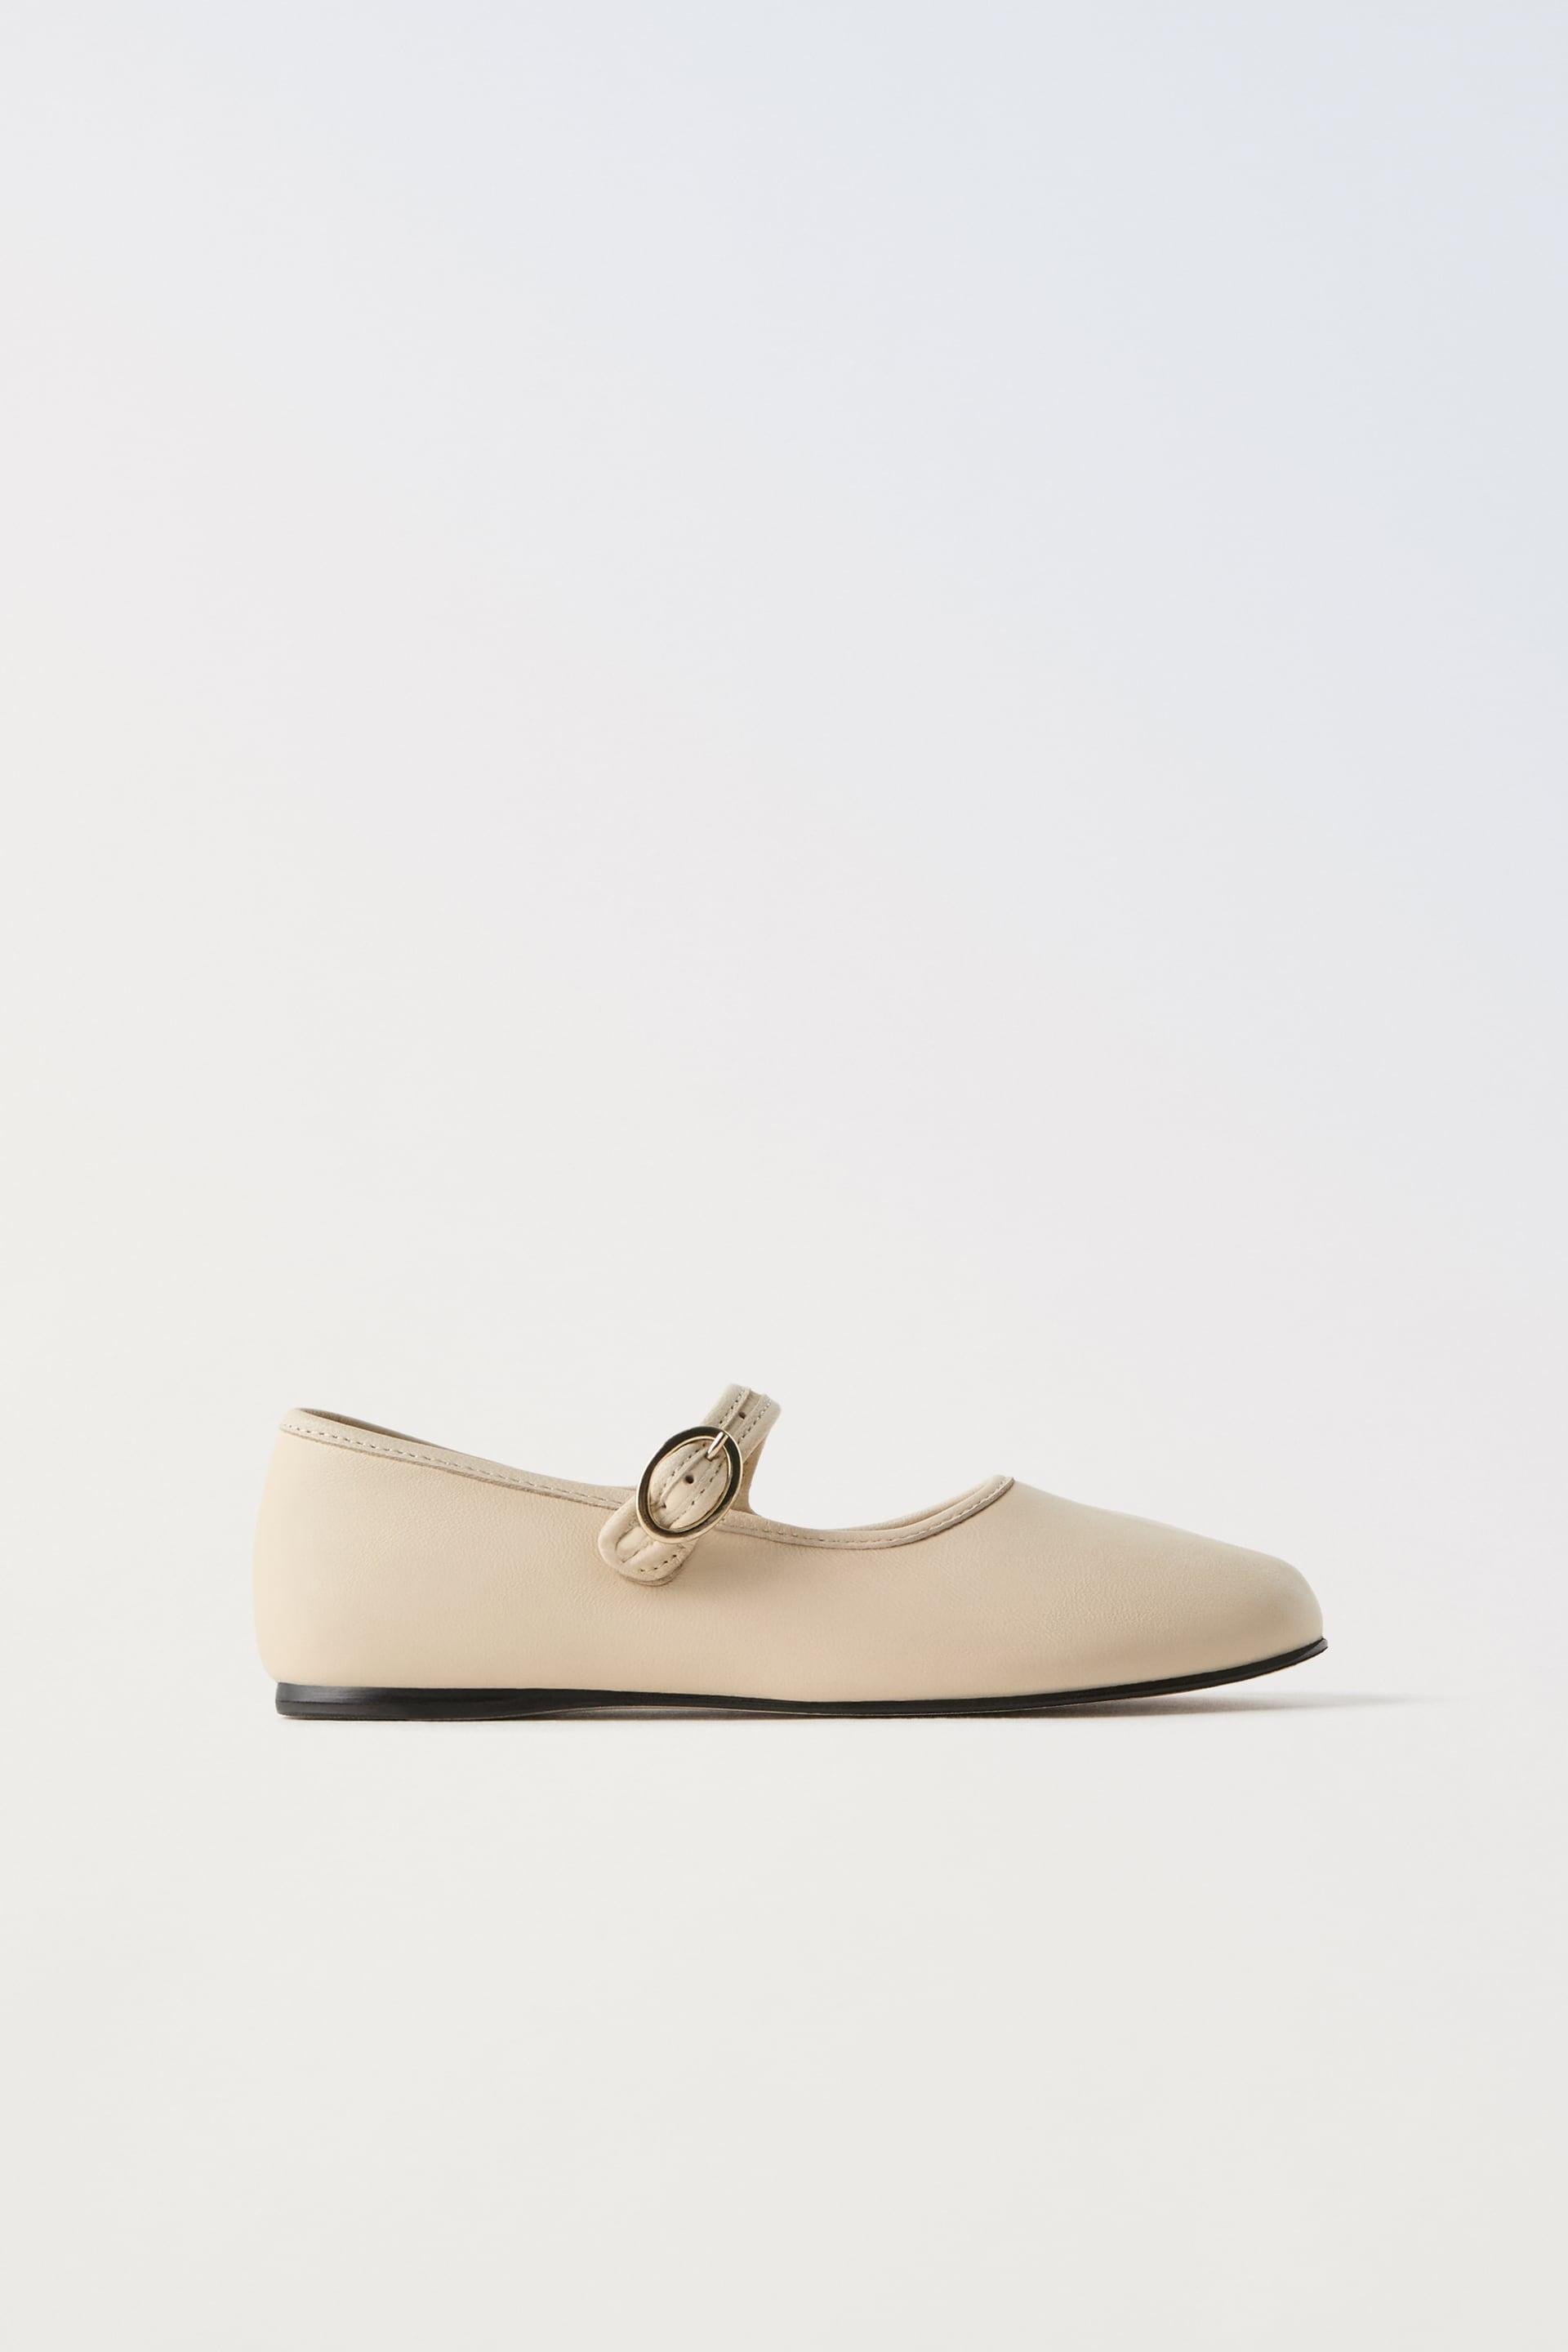 LEATHER BALLET FLATS by ZARA